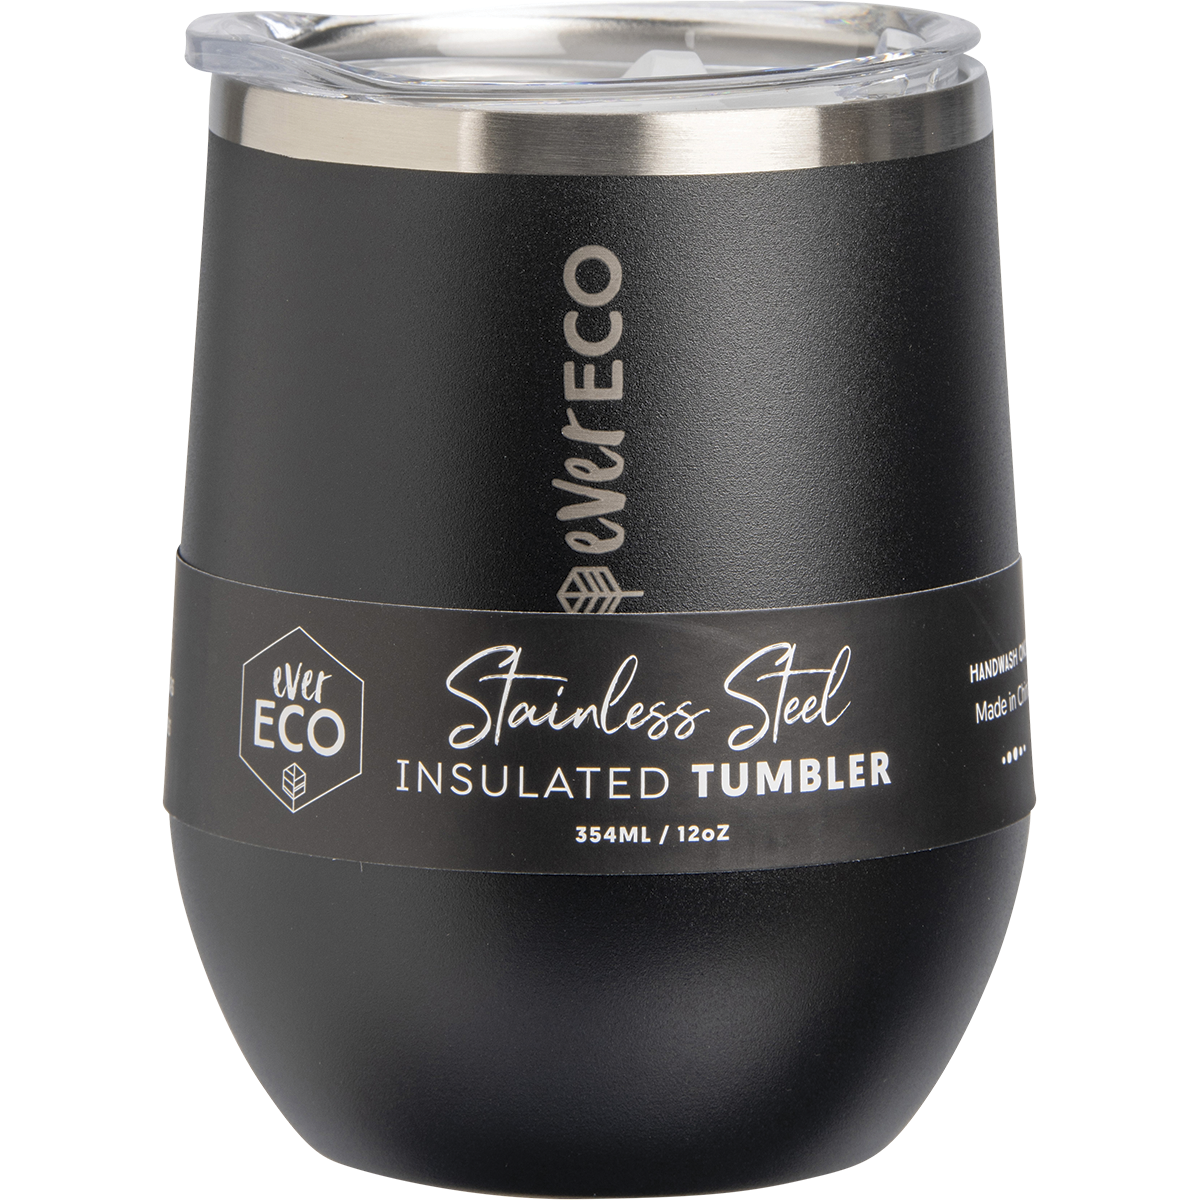 Ever-Eco-Stainless-Steel-Insulated-Tumbler-354ml-Onyx